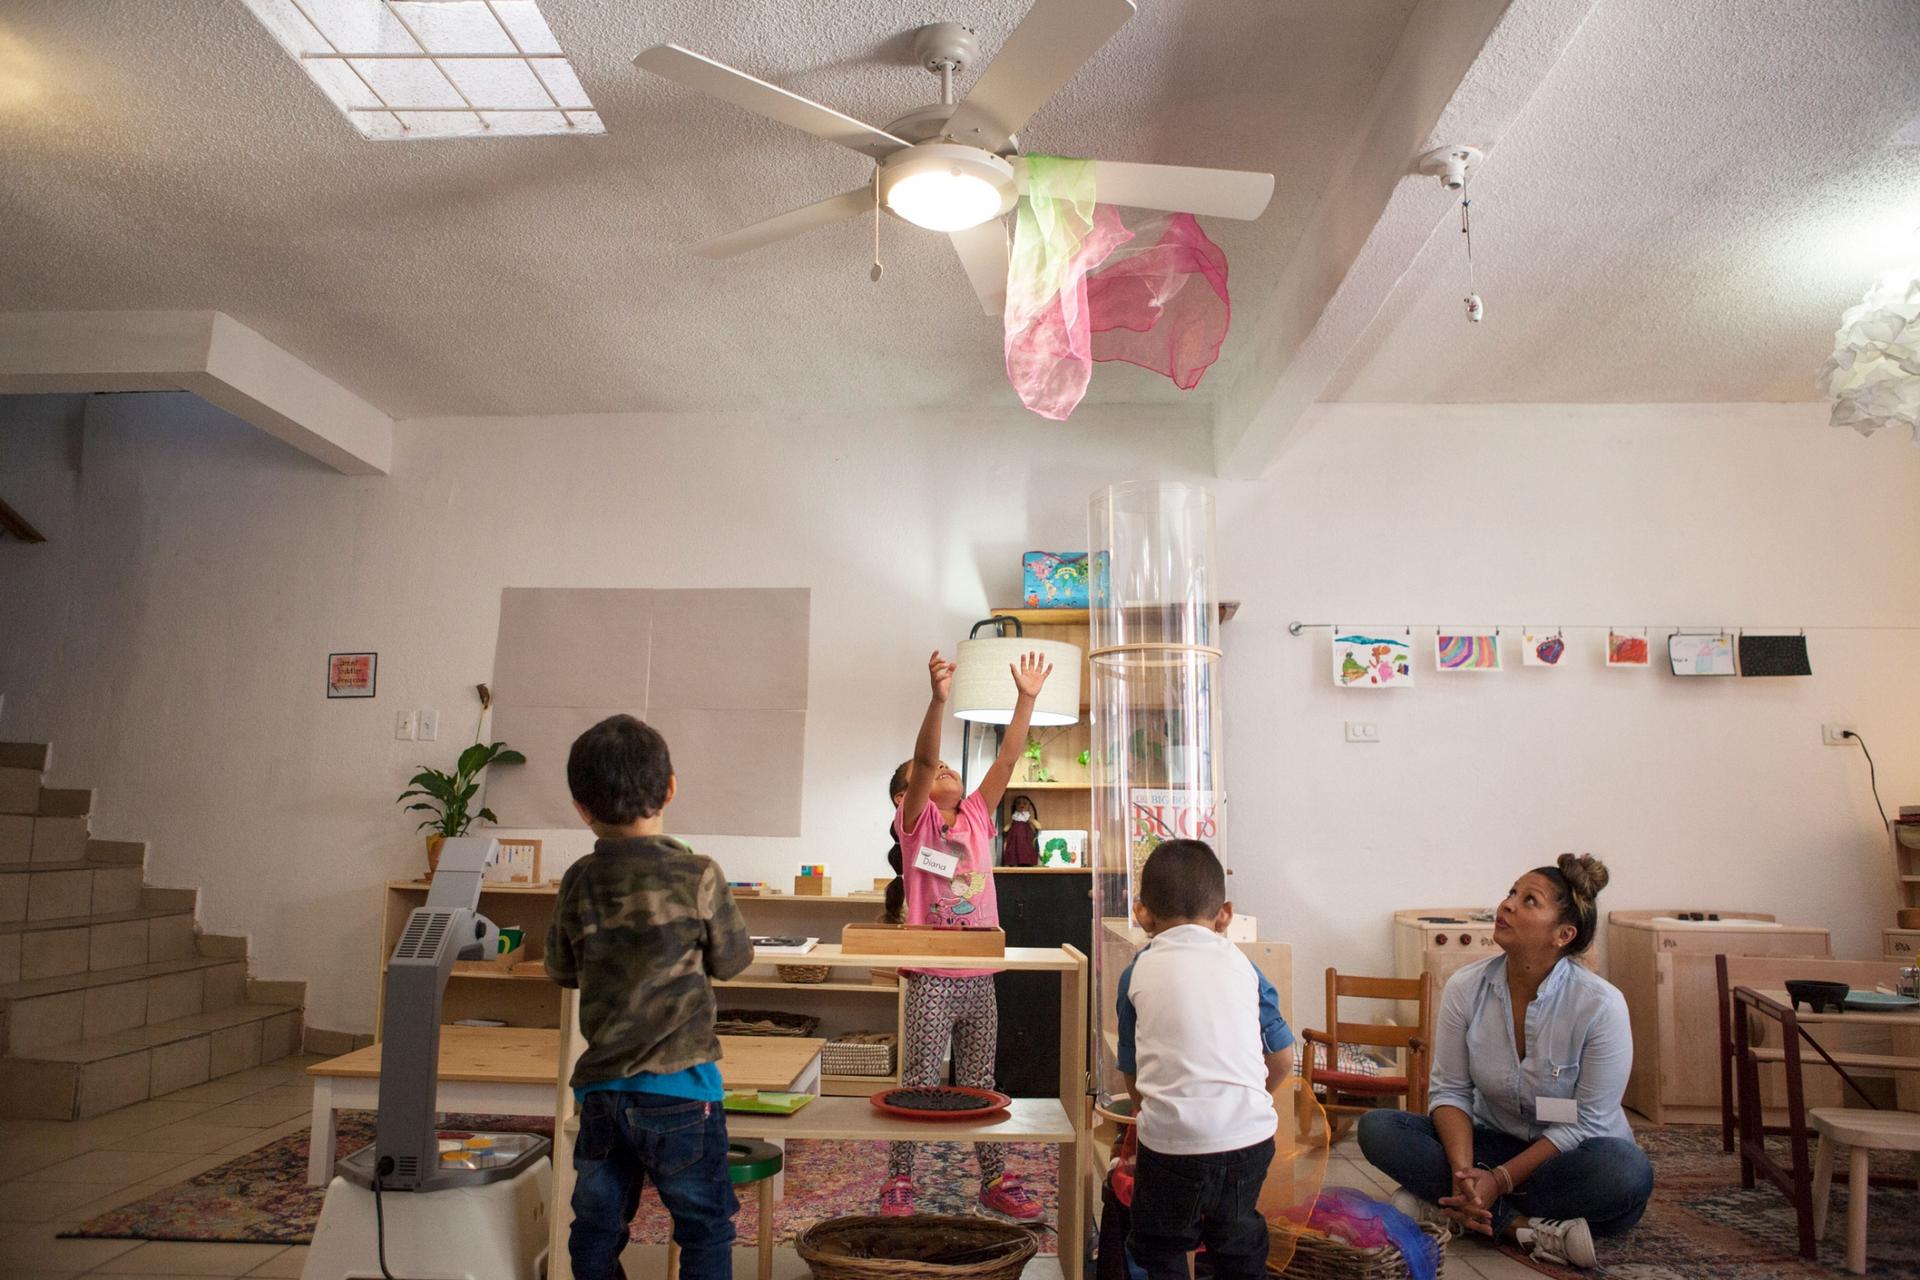 Several children are shown playing with a pink and white scarf shown caught attached to a ceiling fan.